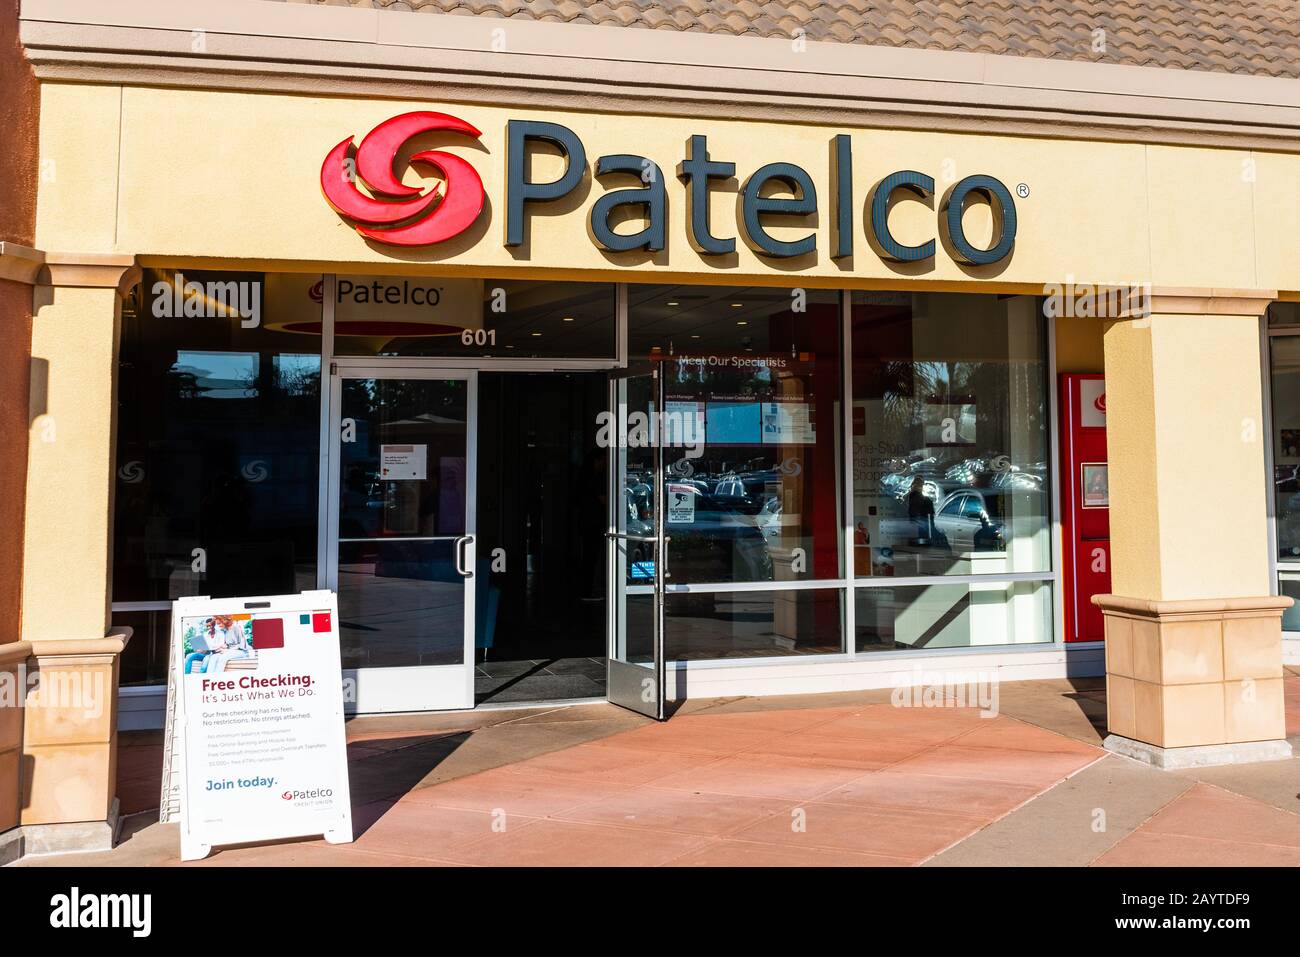 Feb 14, 2020 Milpitas / CA / USA - Patelco branch in Silicon Valley; Patelco Credit Union is a community credit union present in most of Northern Cali Stock Photo